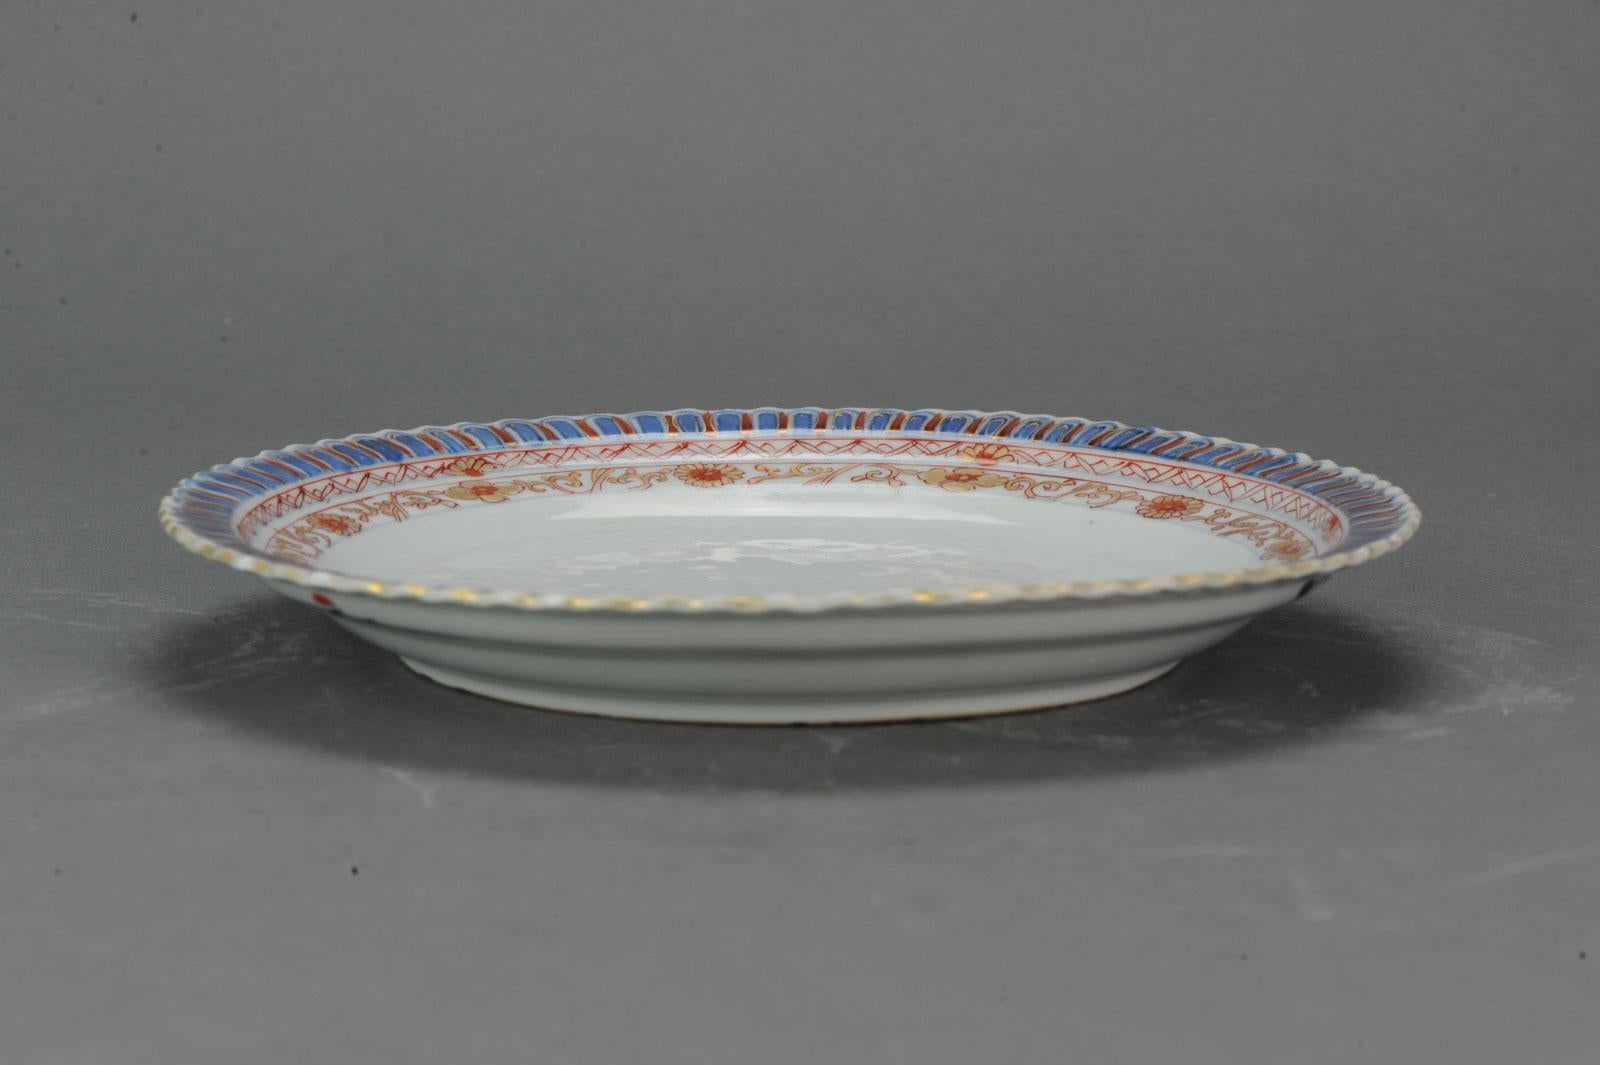 A very lovely and delicately decorated Imari dish, with central plate carved and border in delicate imari colors and lobbed.
Very nice and unusual dish in great condition.
The painting quality is extremely high.

Additional information:
Material: